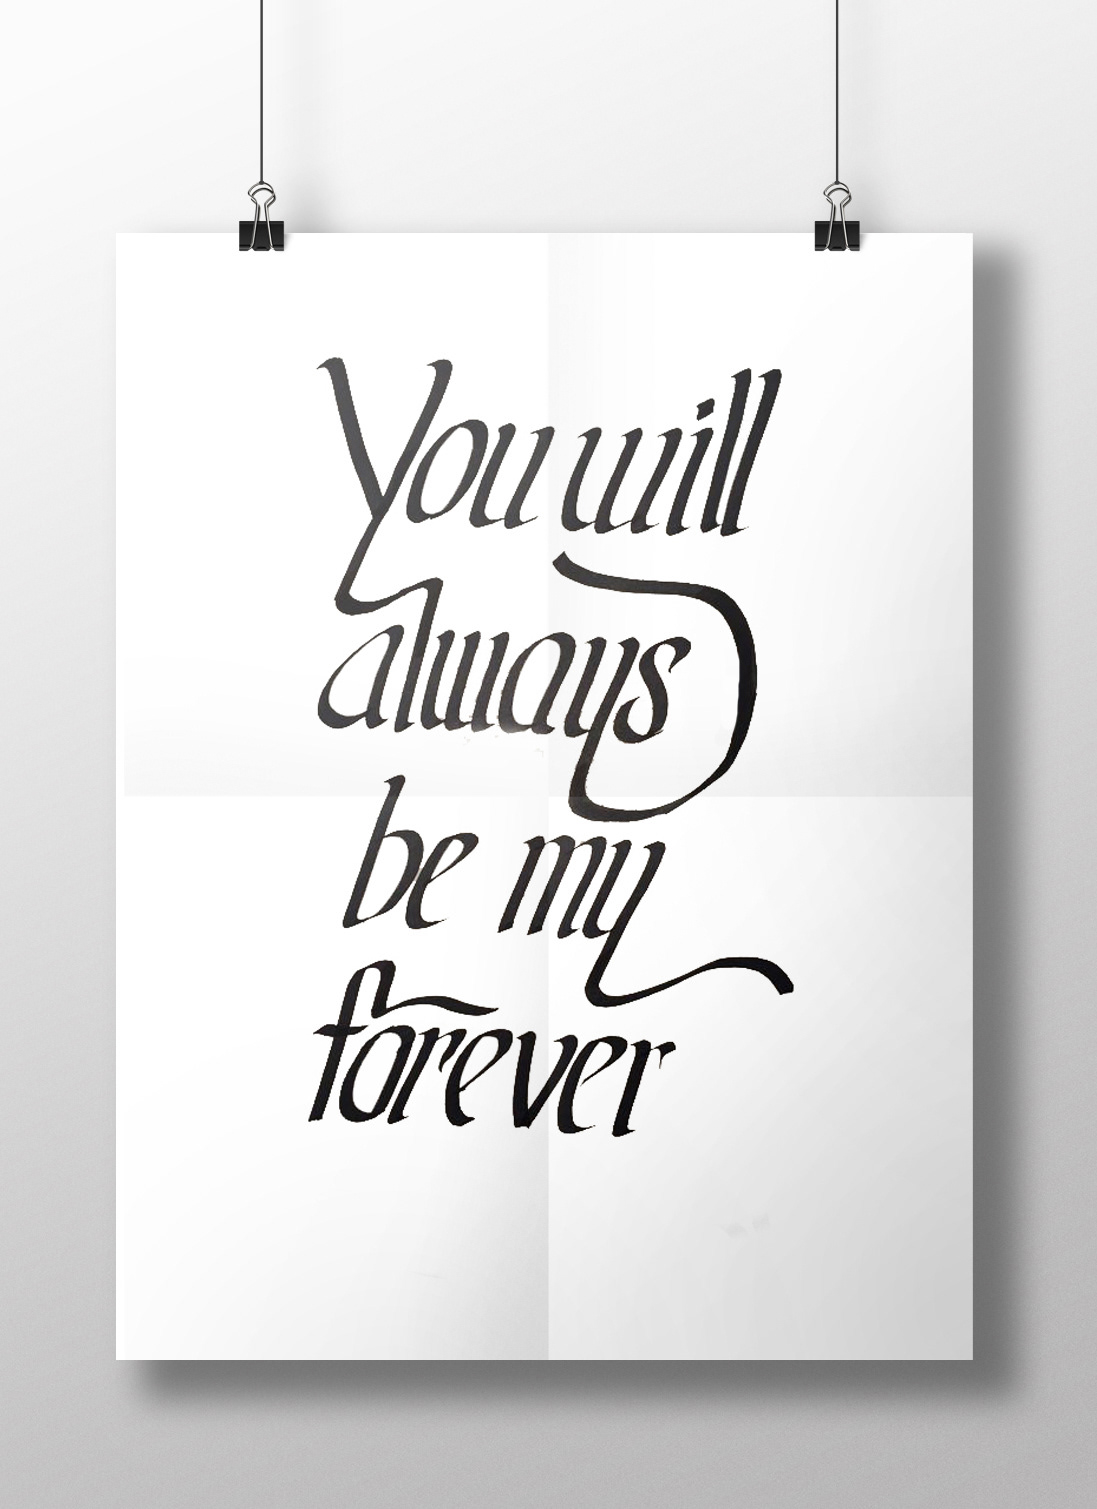 poster design letters hand writing type